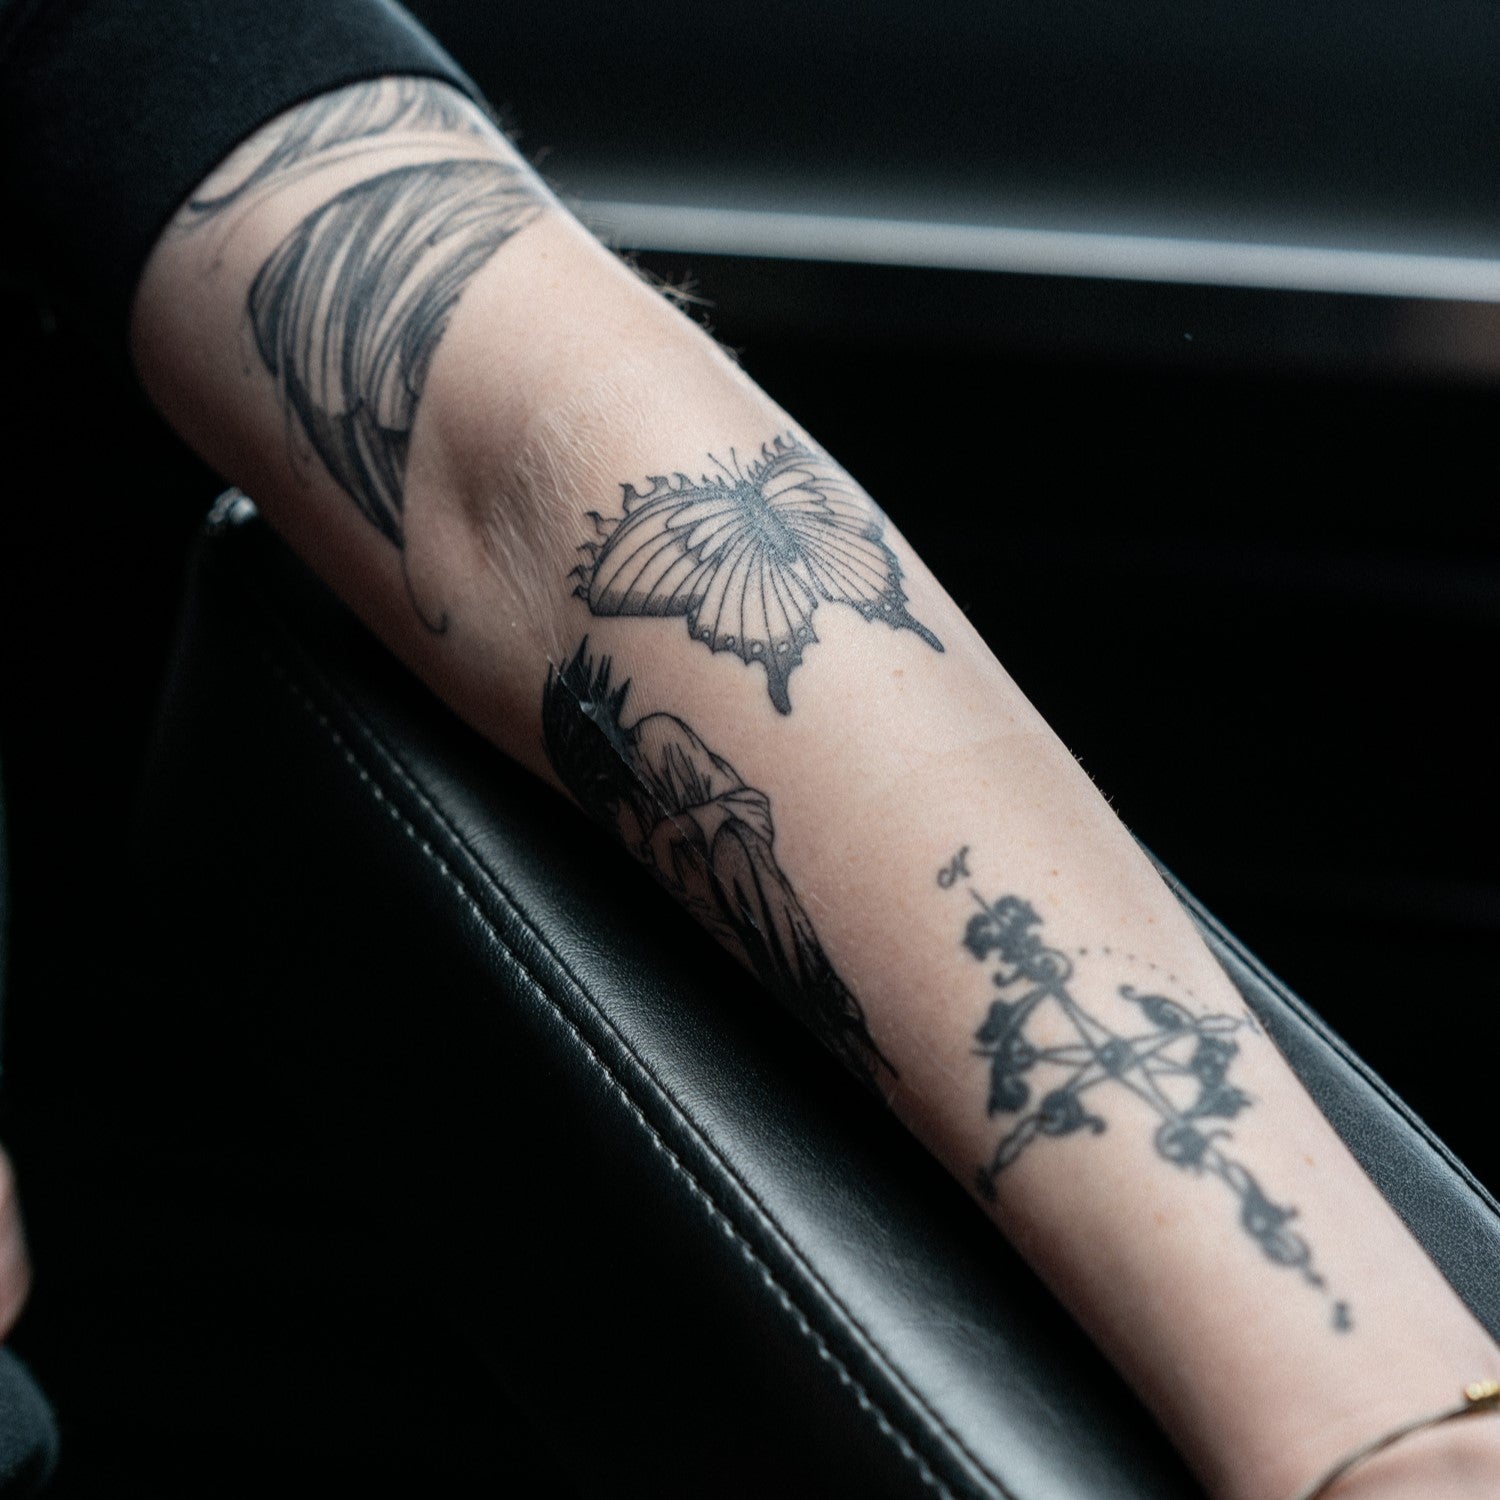 How to protect your new tattoo if you have to go swimming - Quora